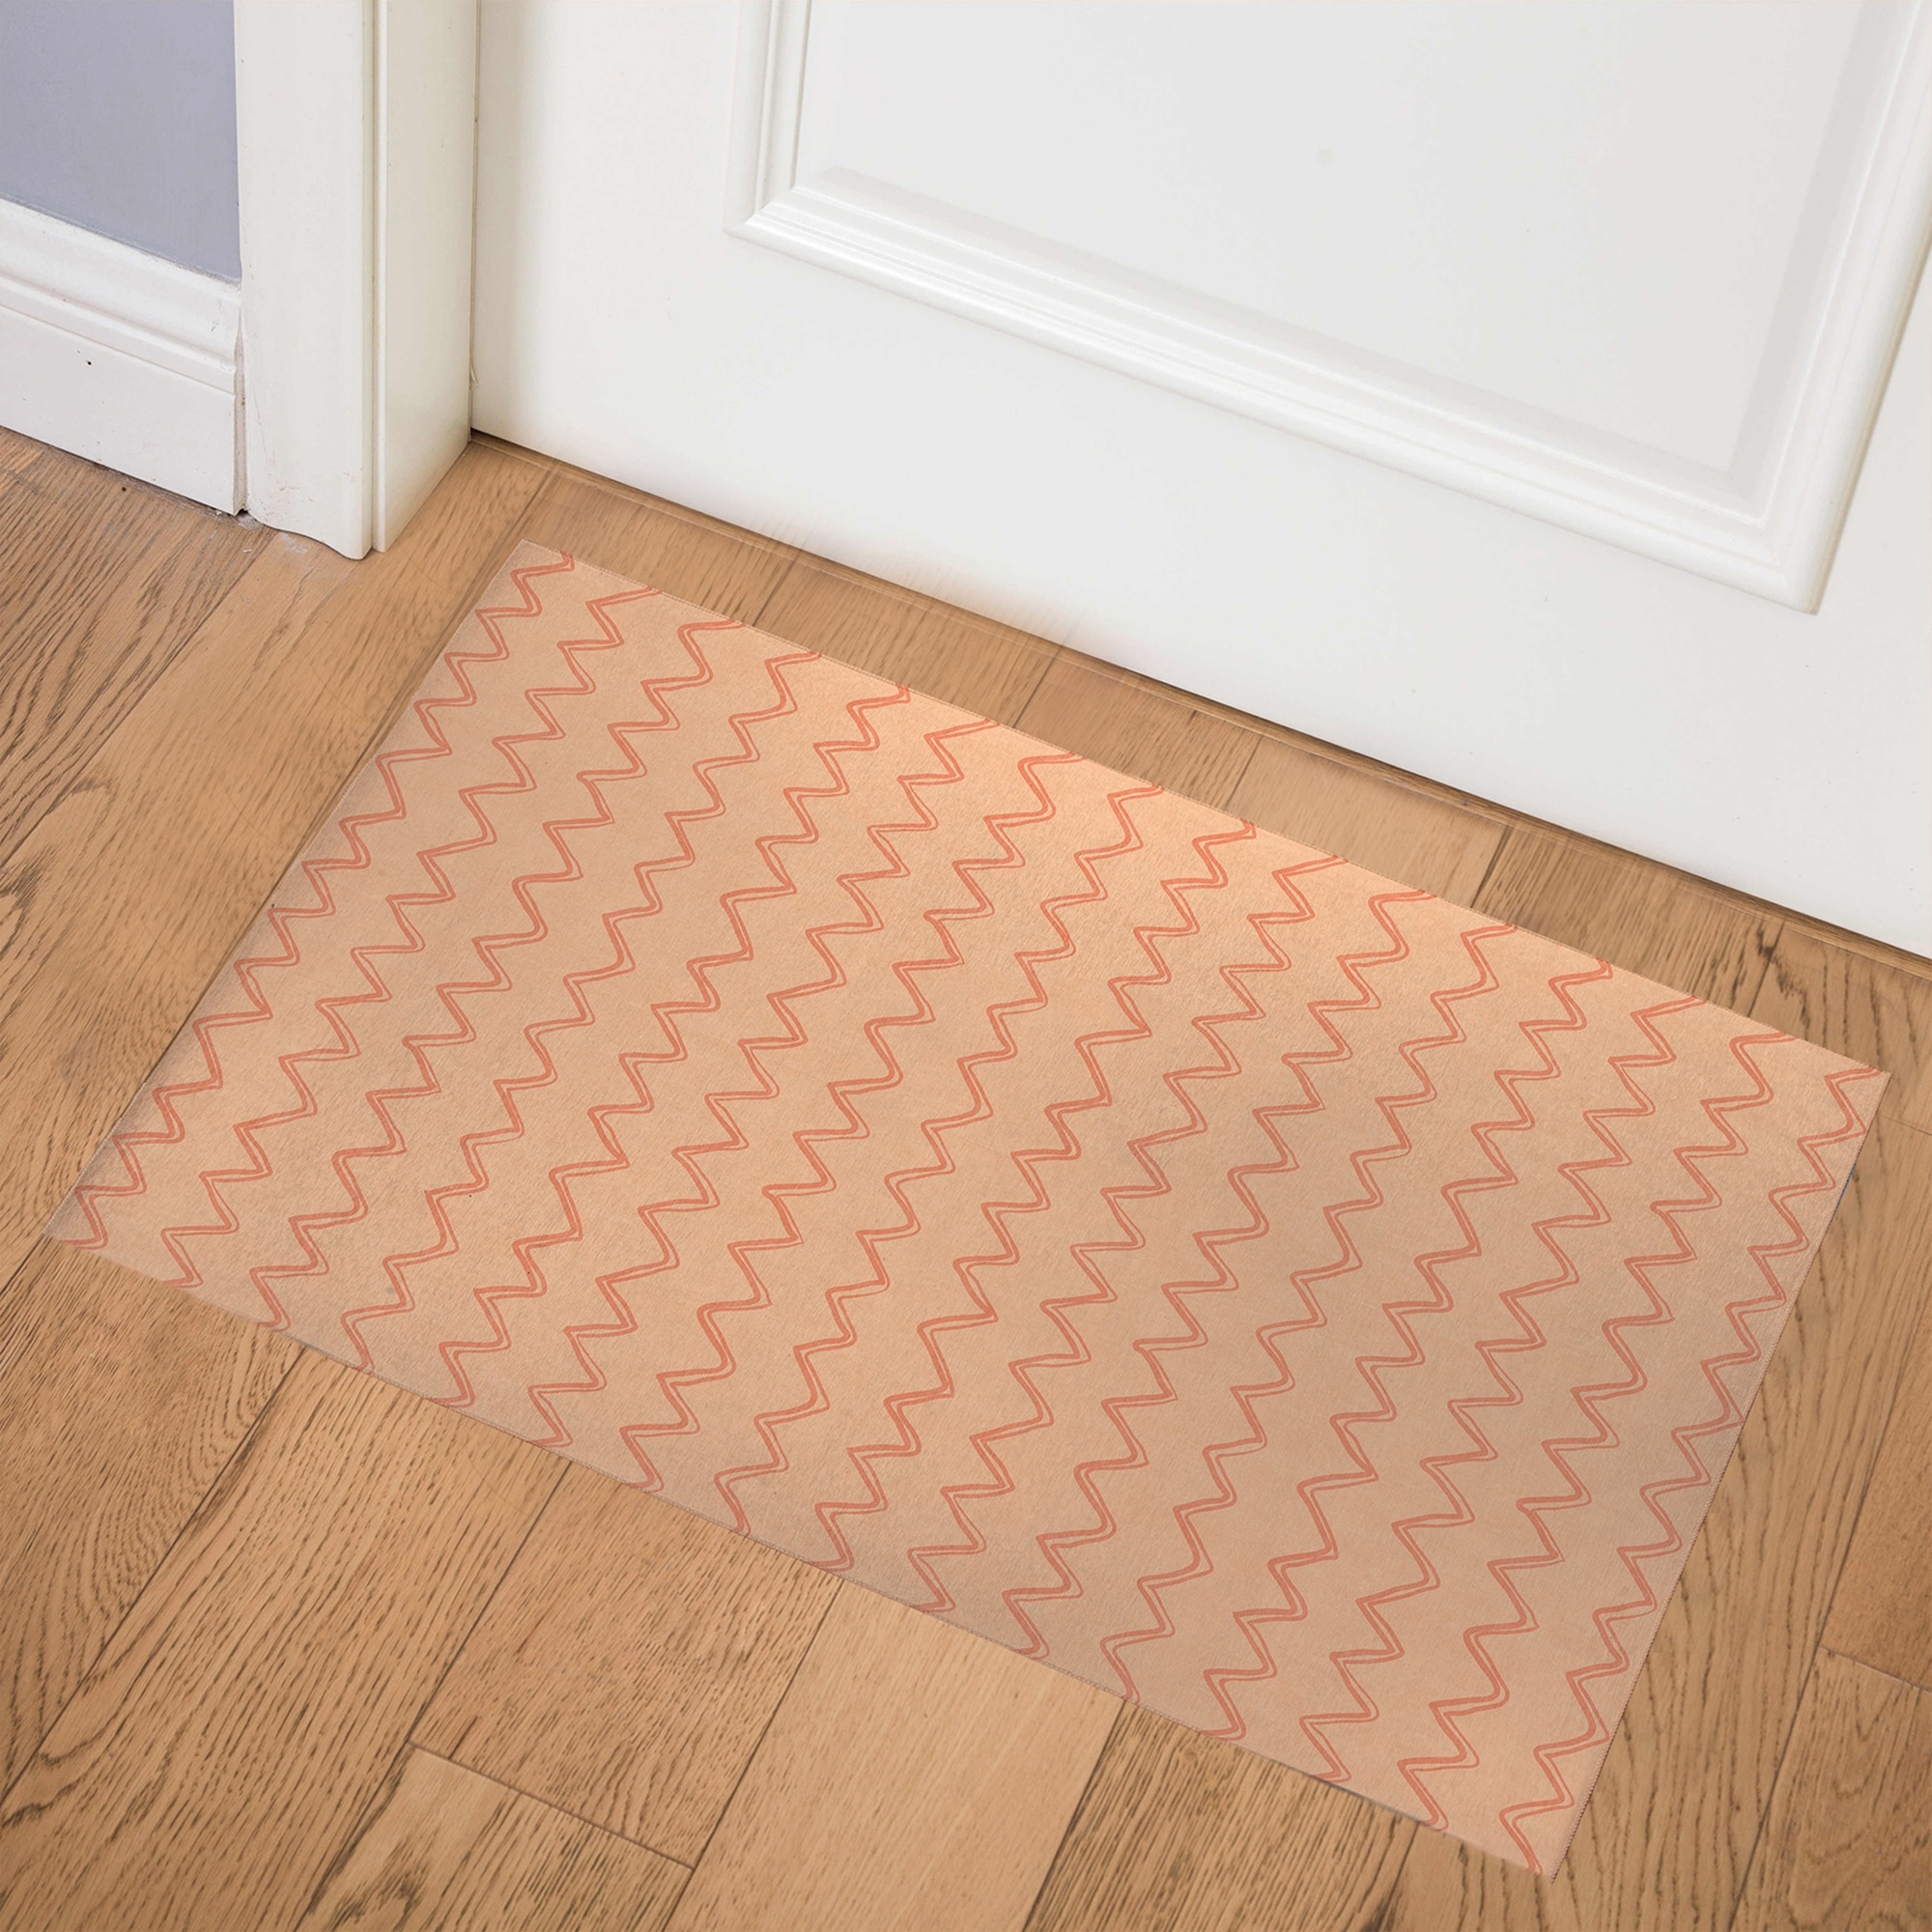 https://ak1.ostkcdn.com/images/products/is/images/direct/12151db8c777990c64c676716fa0dcb5ae25cf3c/MOROCCAN-HORIZONTAL-STRIPE-ORANGE-Indoor-Floor-Mat-By-Becky-Bailey.jpg